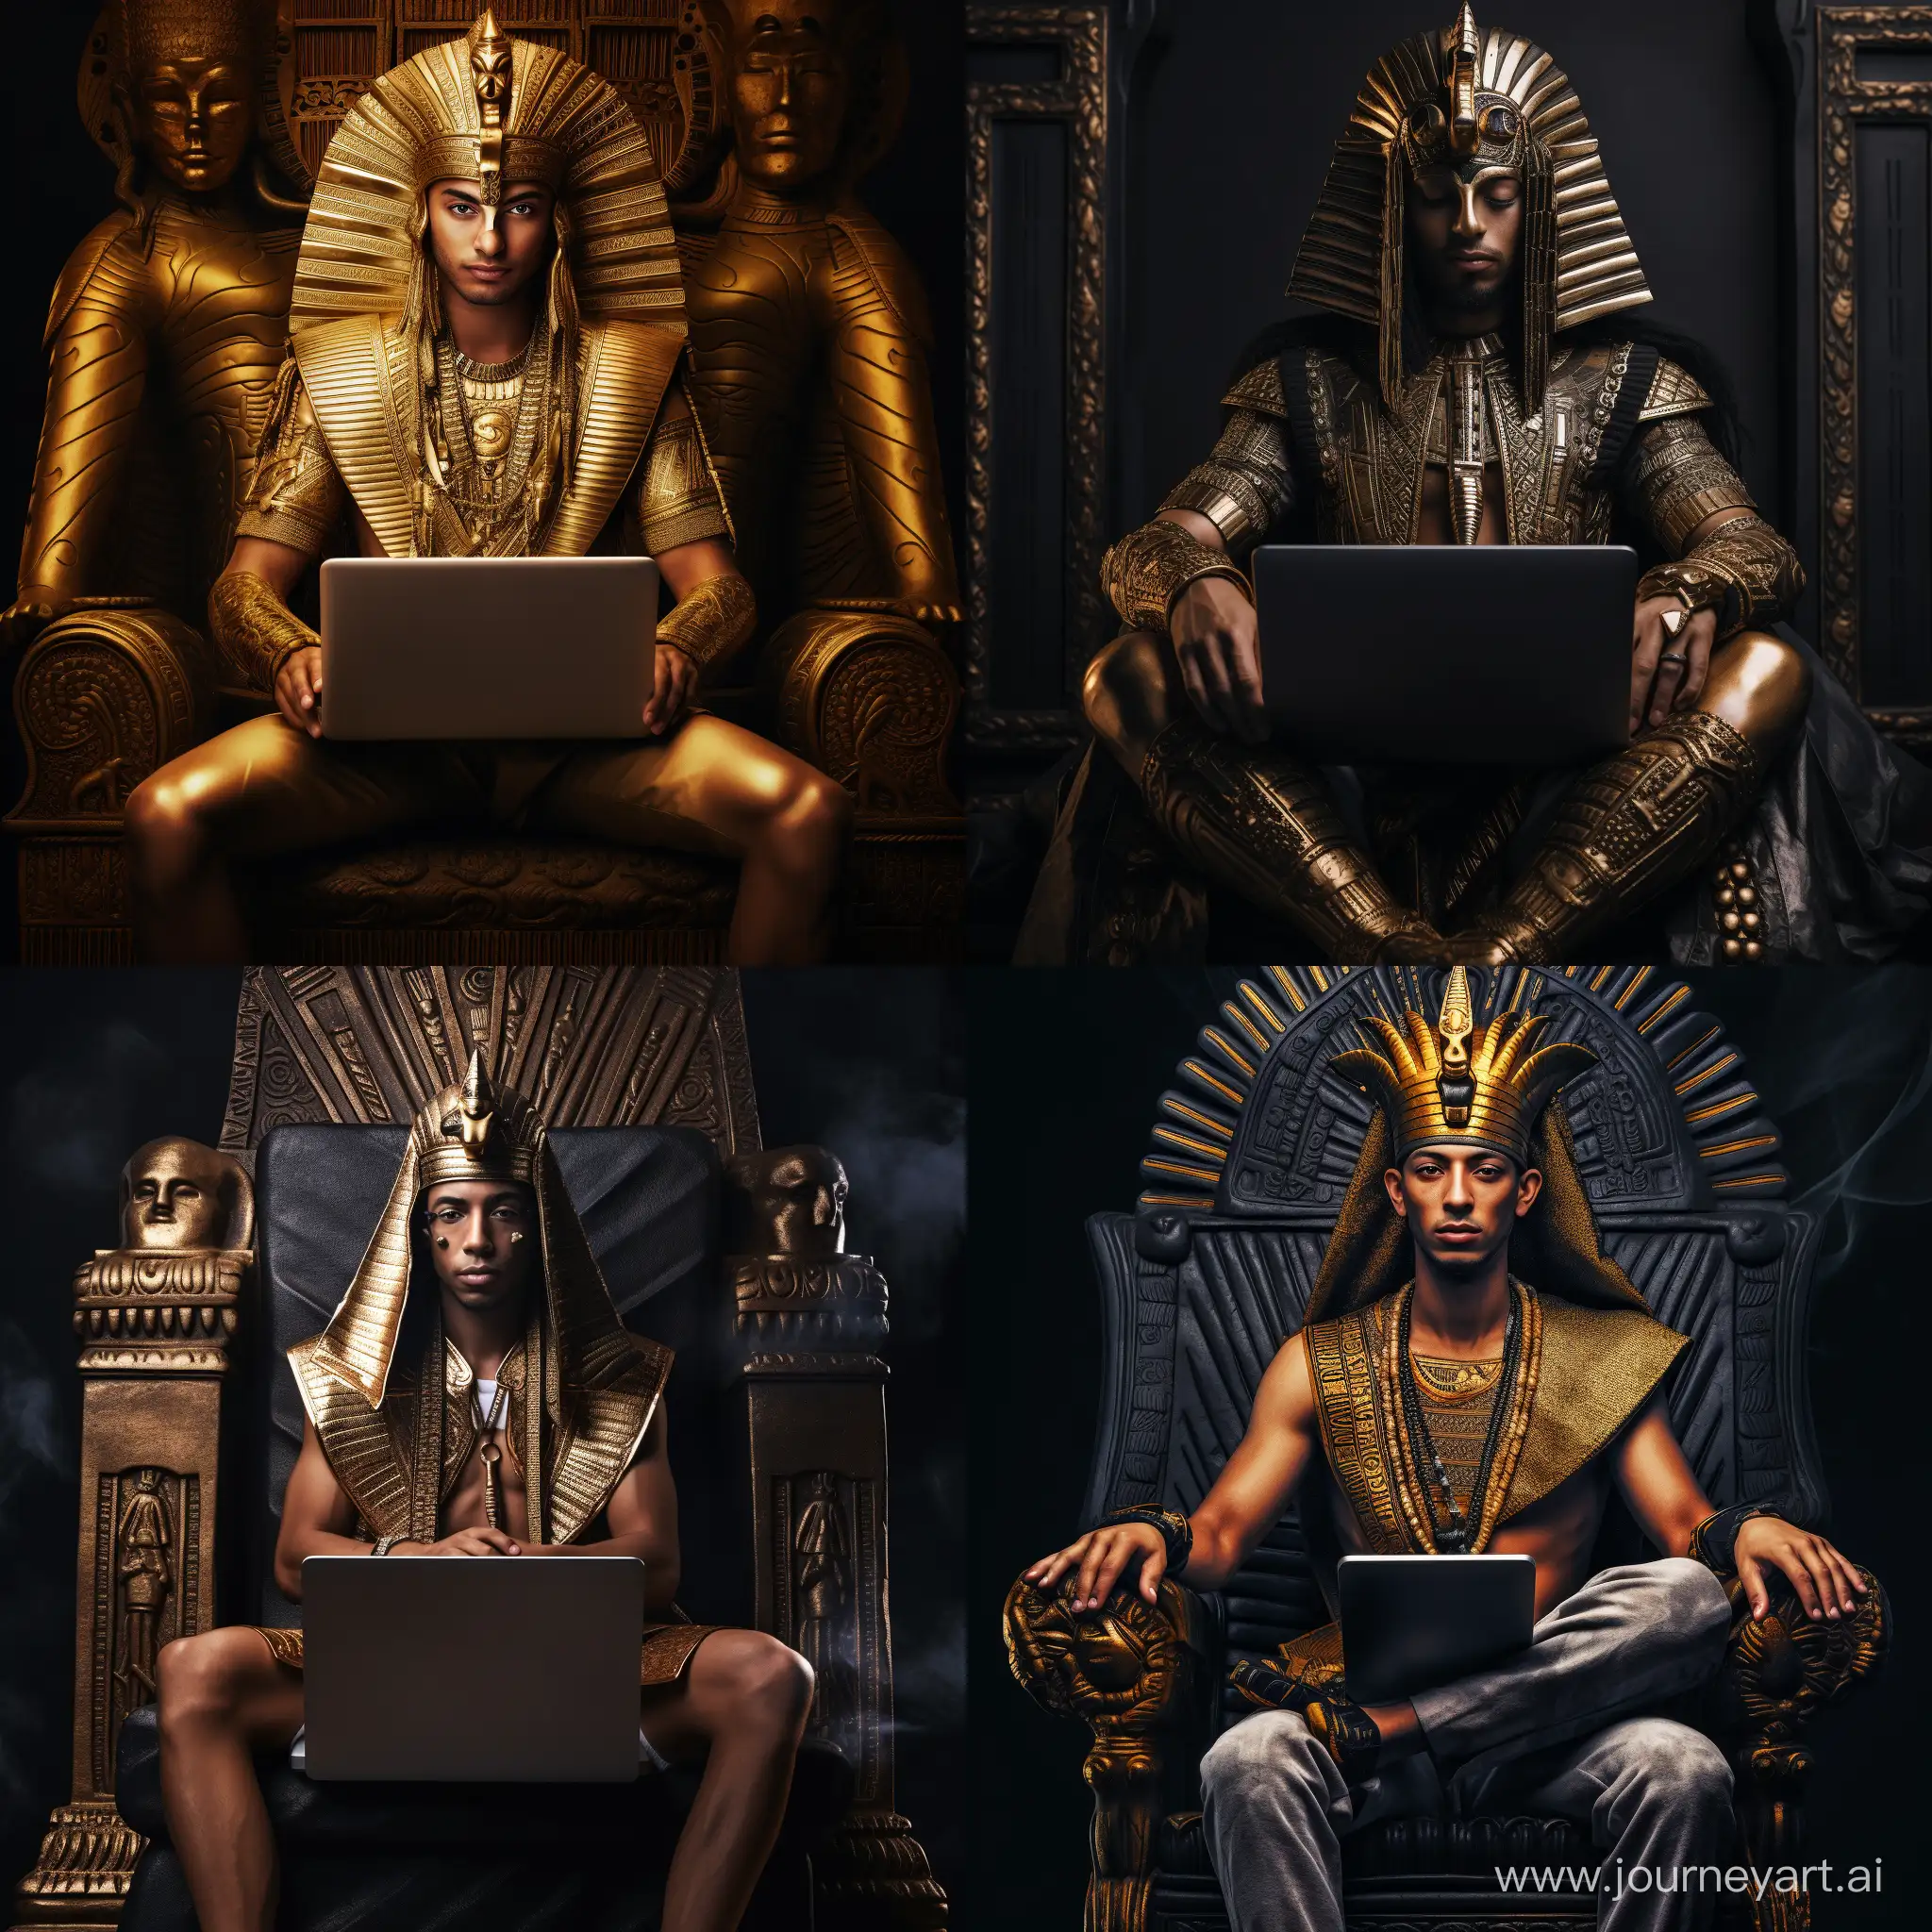 Pharaoh-Sitting-on-Chair-with-Laptop